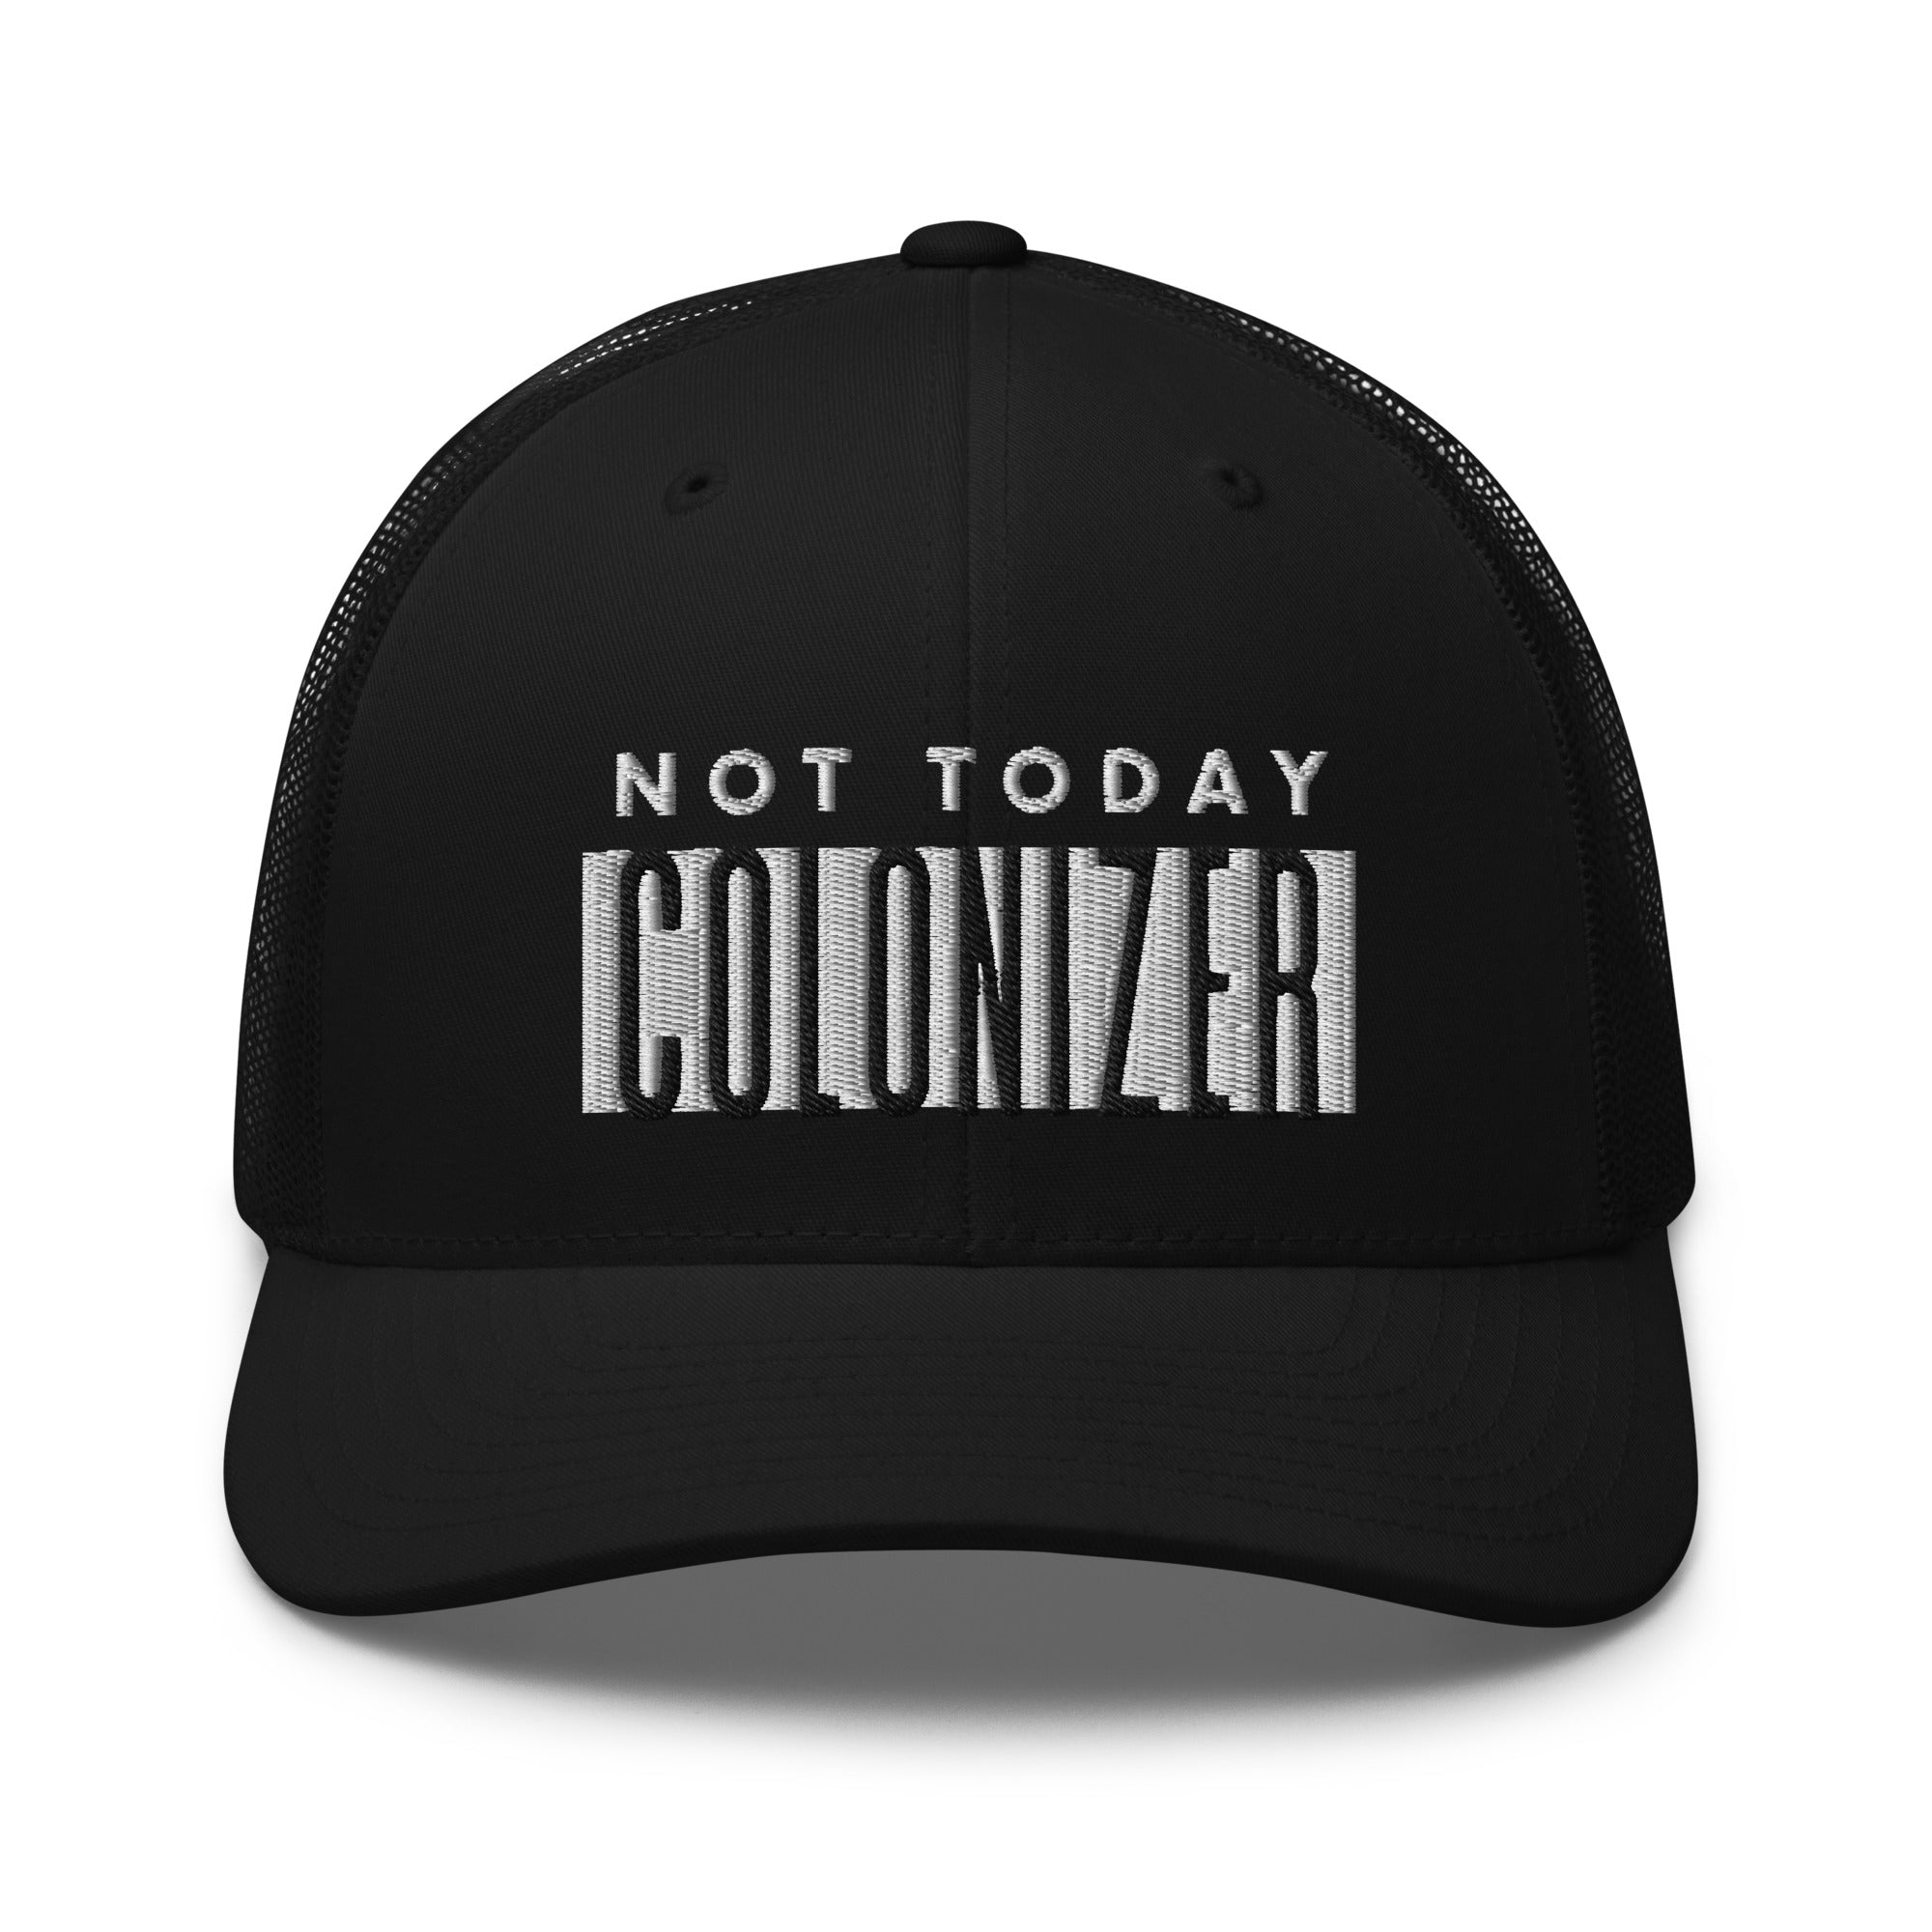 Not Today Colonizer Mesh Cap